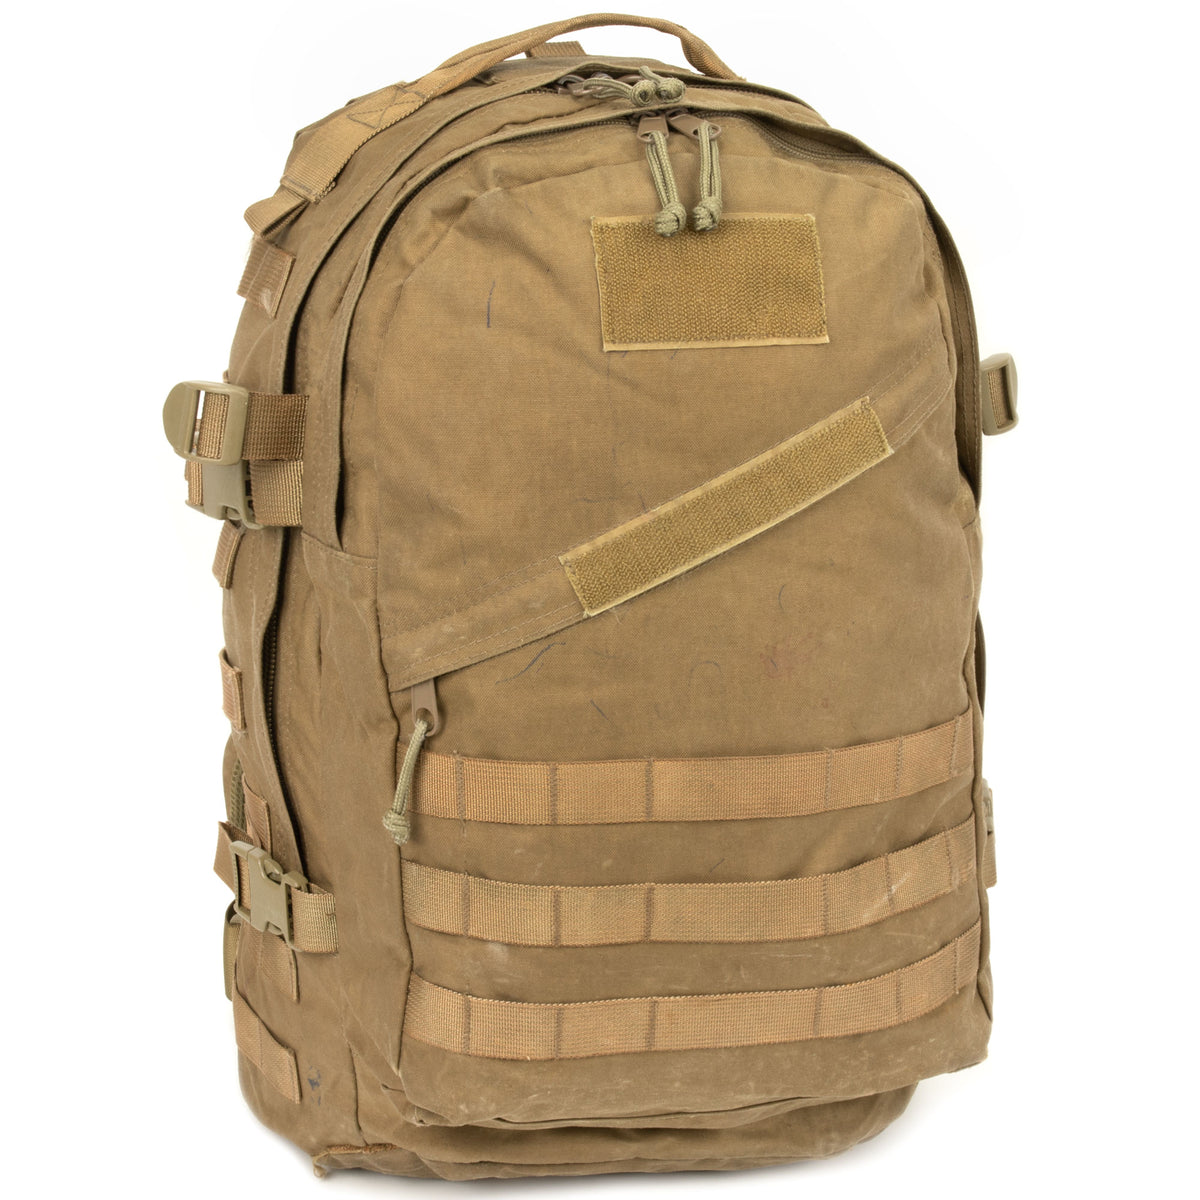 Dutch Army Tactical Molle Daypack 35 Liter | Used